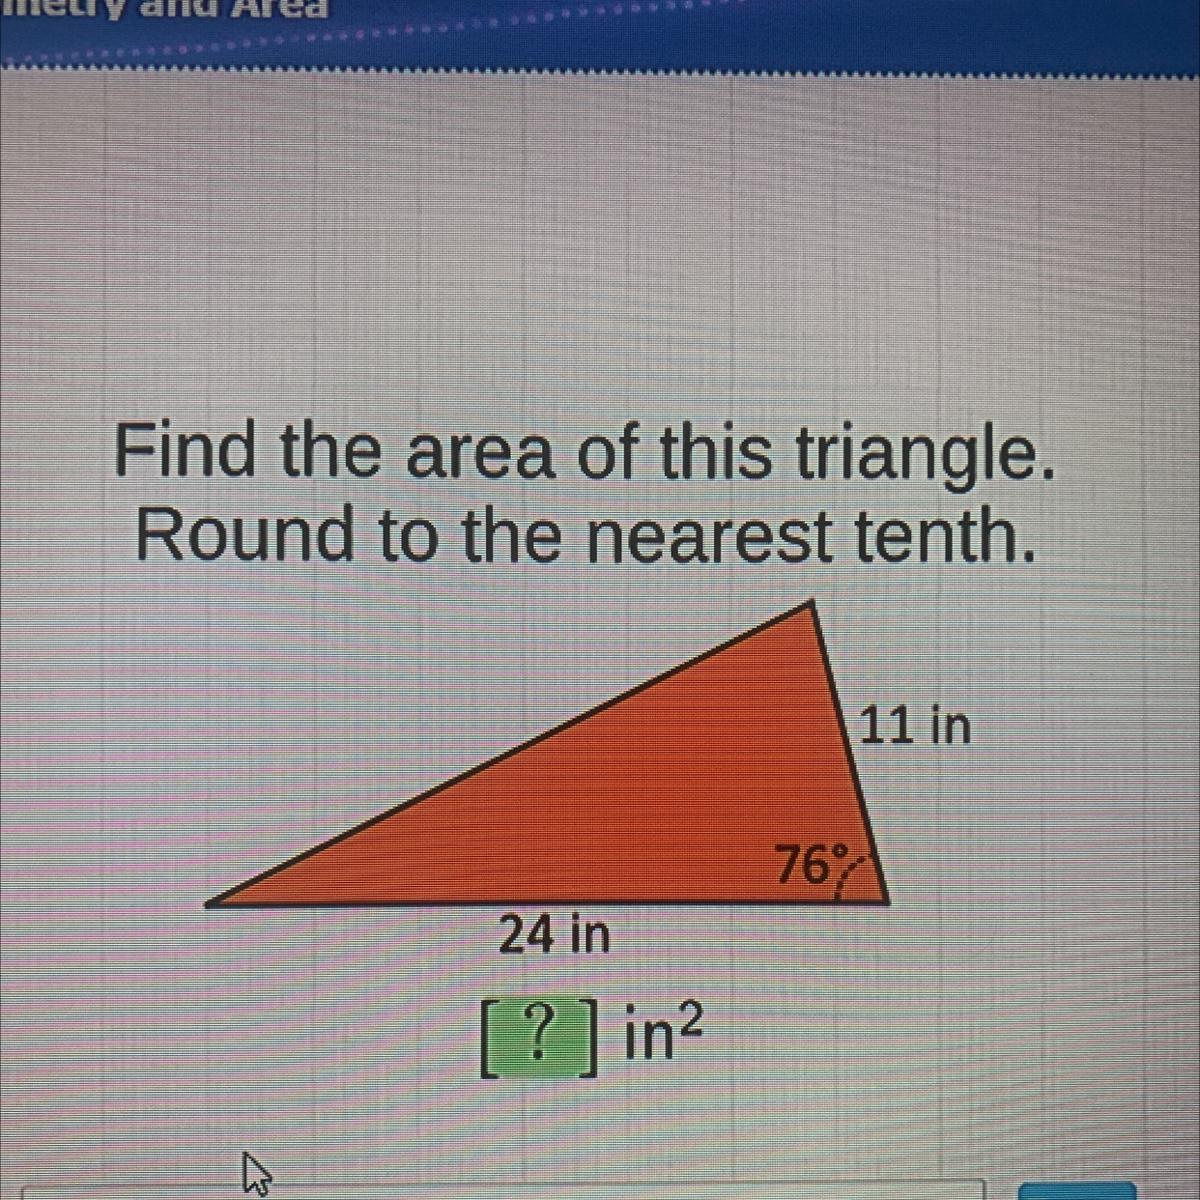 Find The Area Of This Triangle Round To The Nearest Tenth 